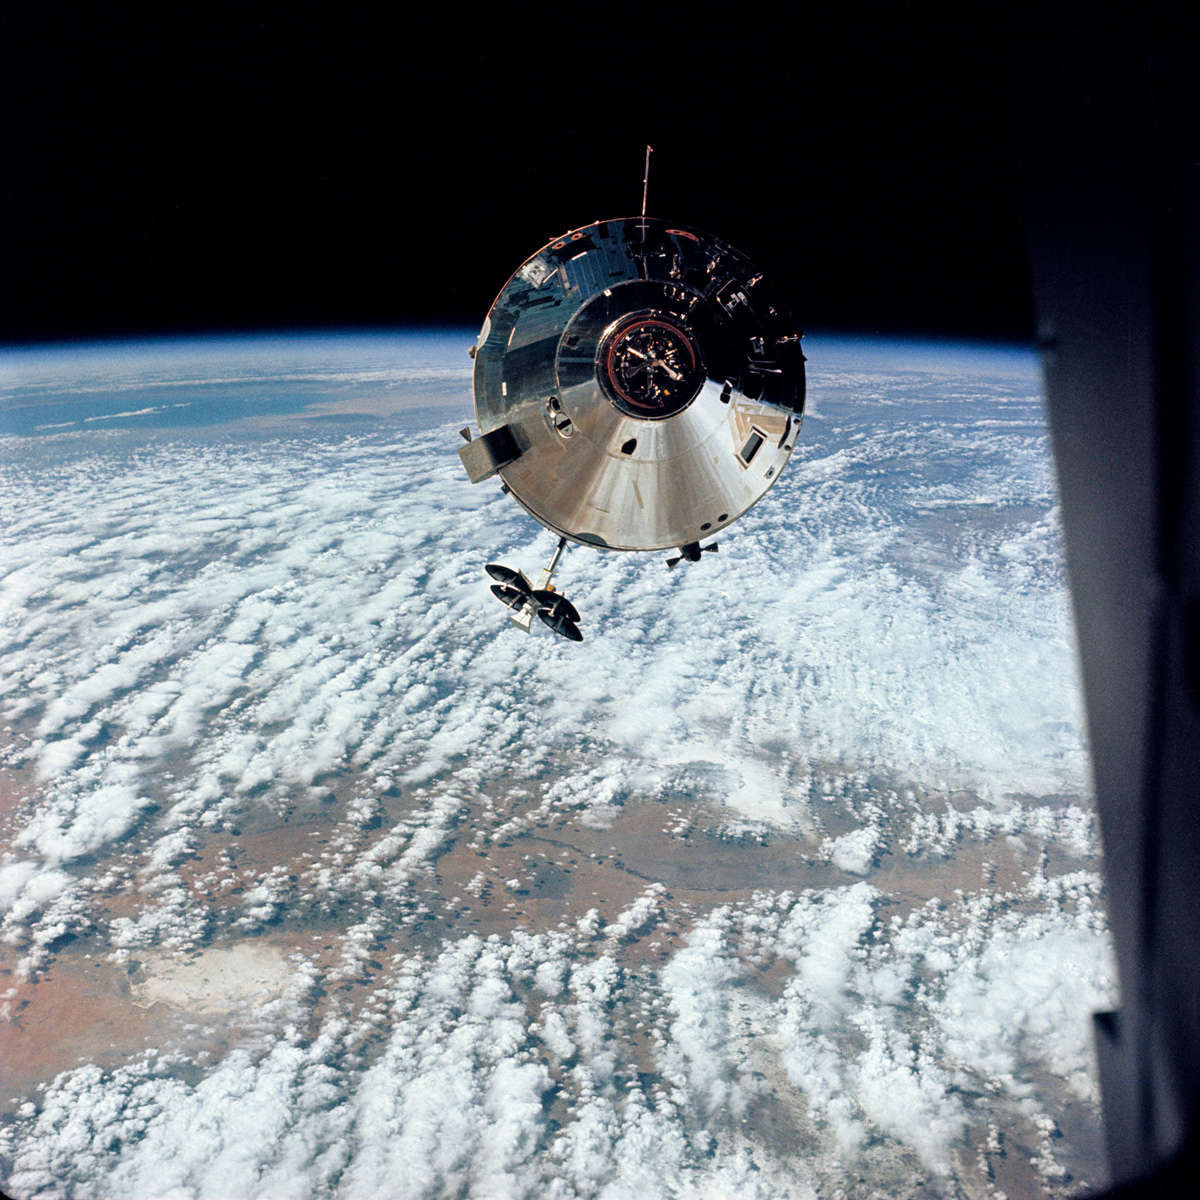 Apollo 9 command module in space with Earth in background